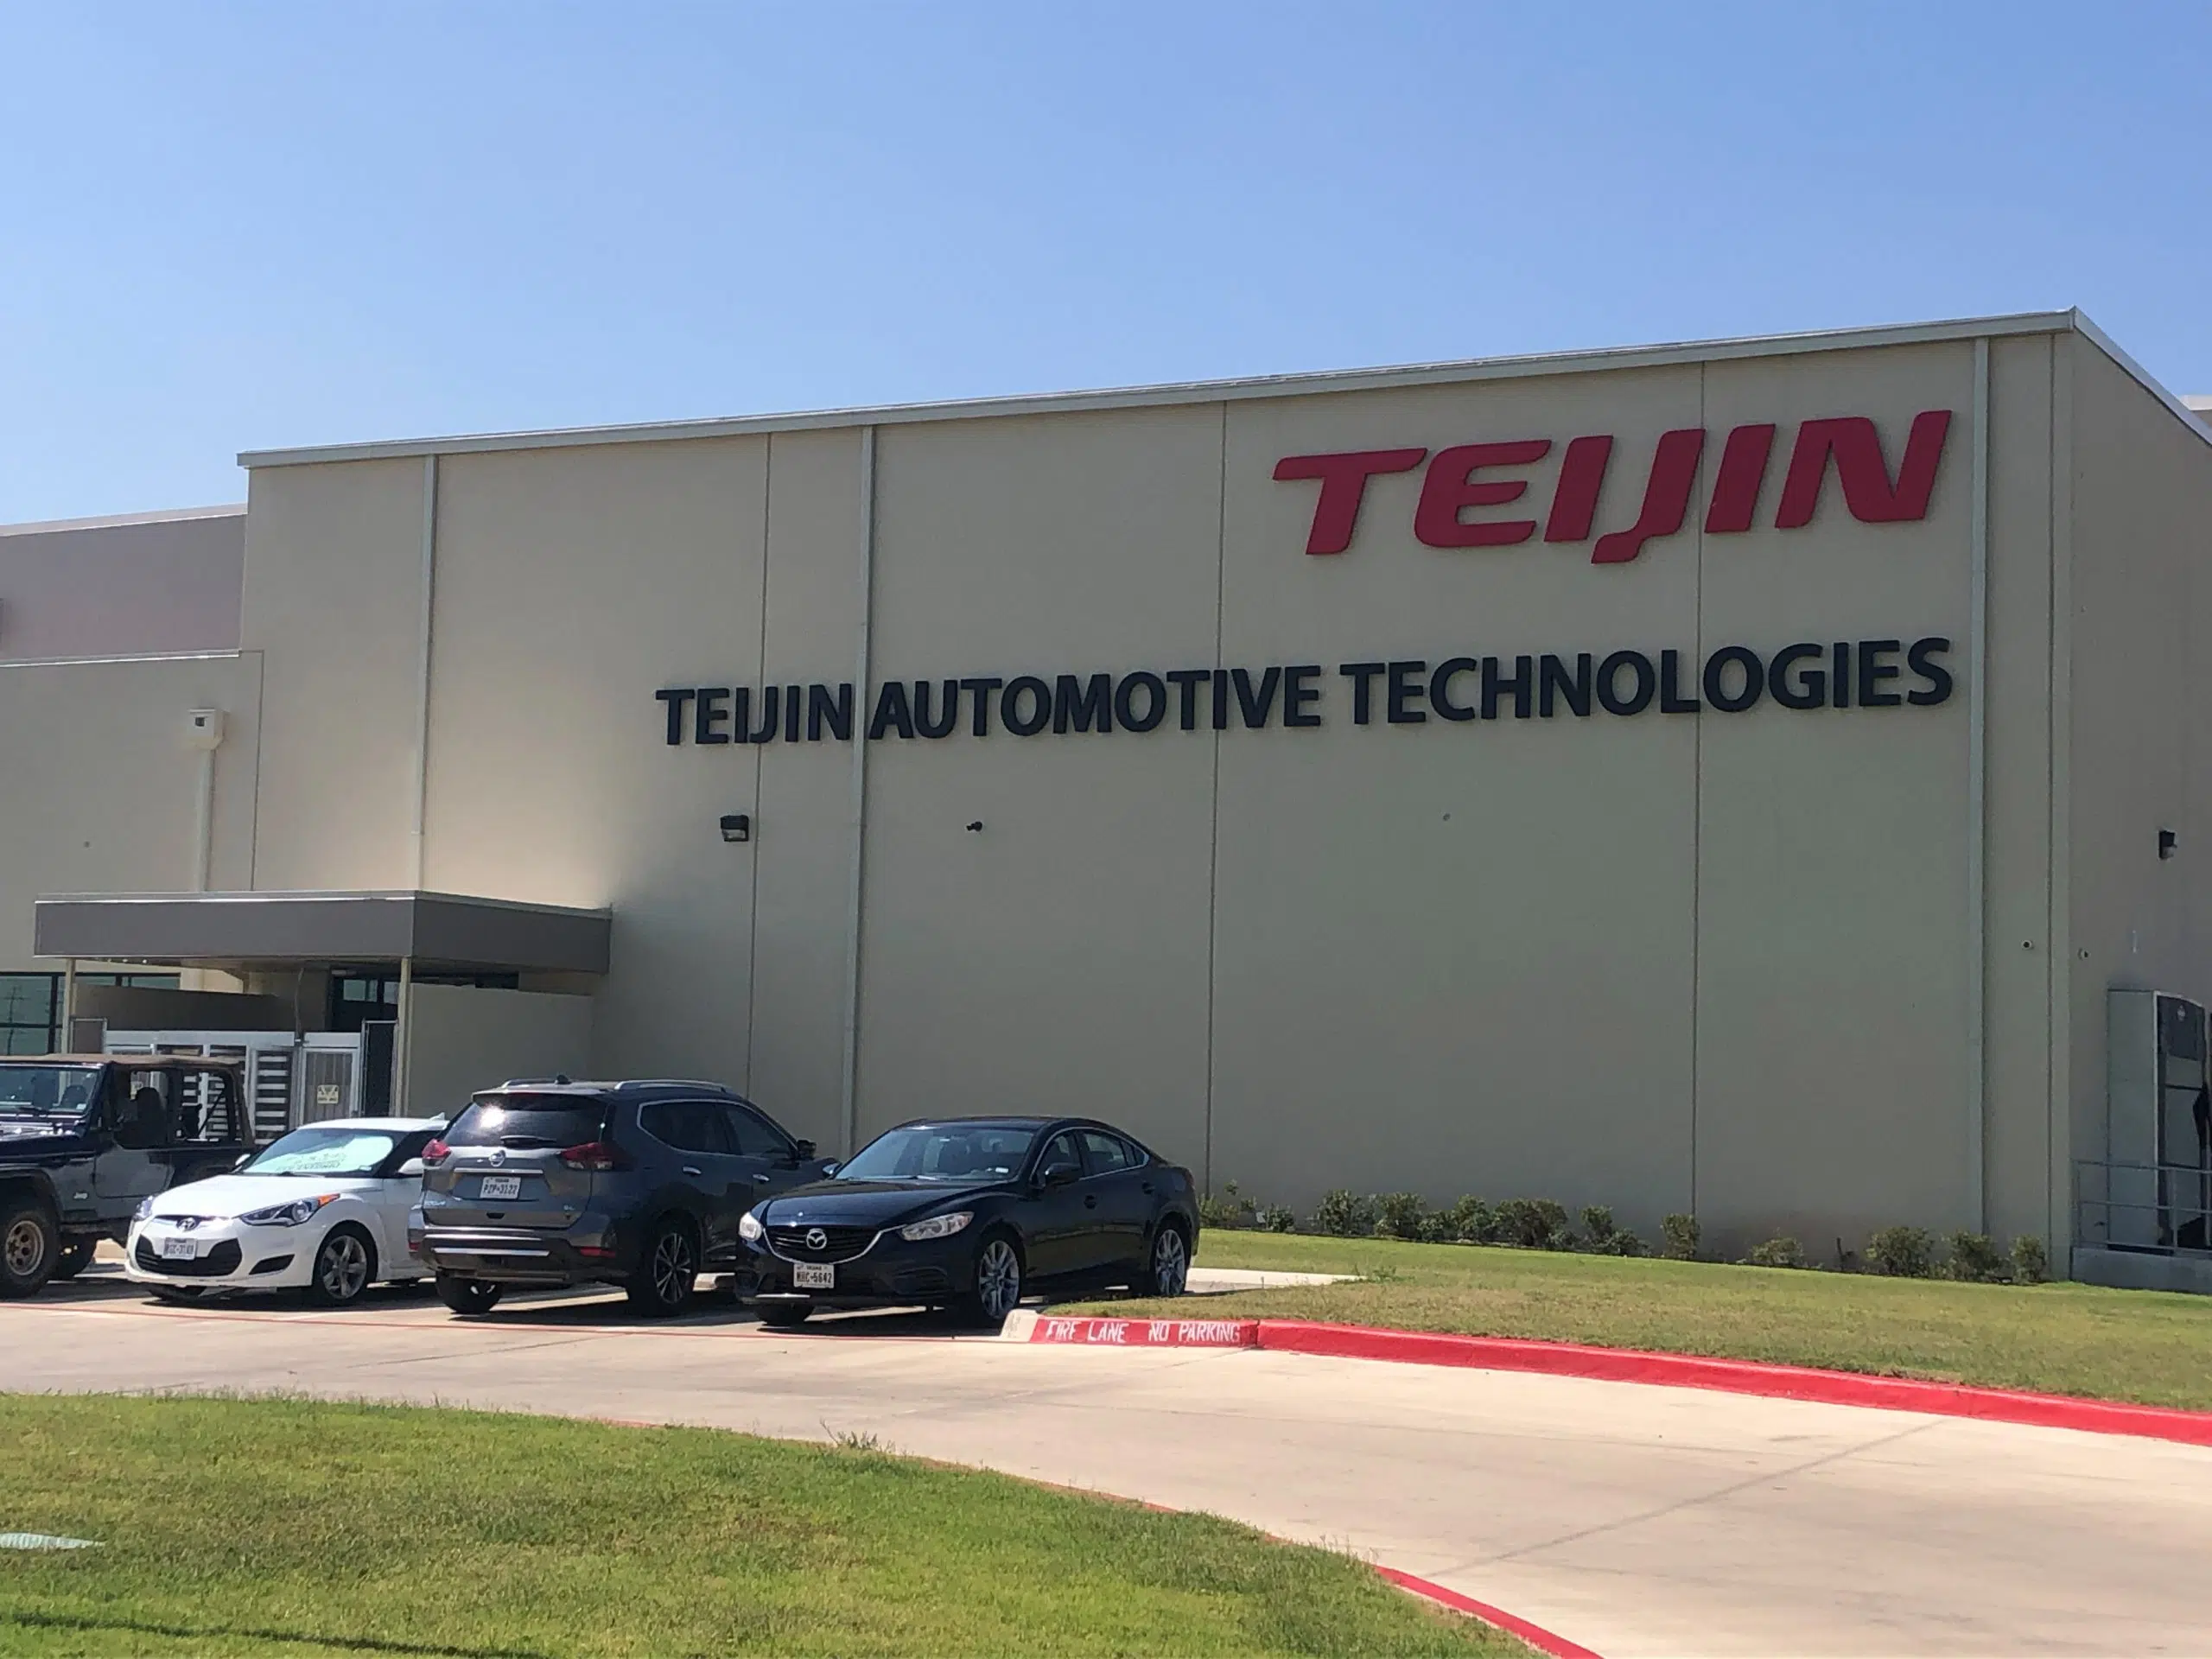 Teijin Automotive Technologies producing pickup boxes for Next Generation Toyota Tundra in Seguin